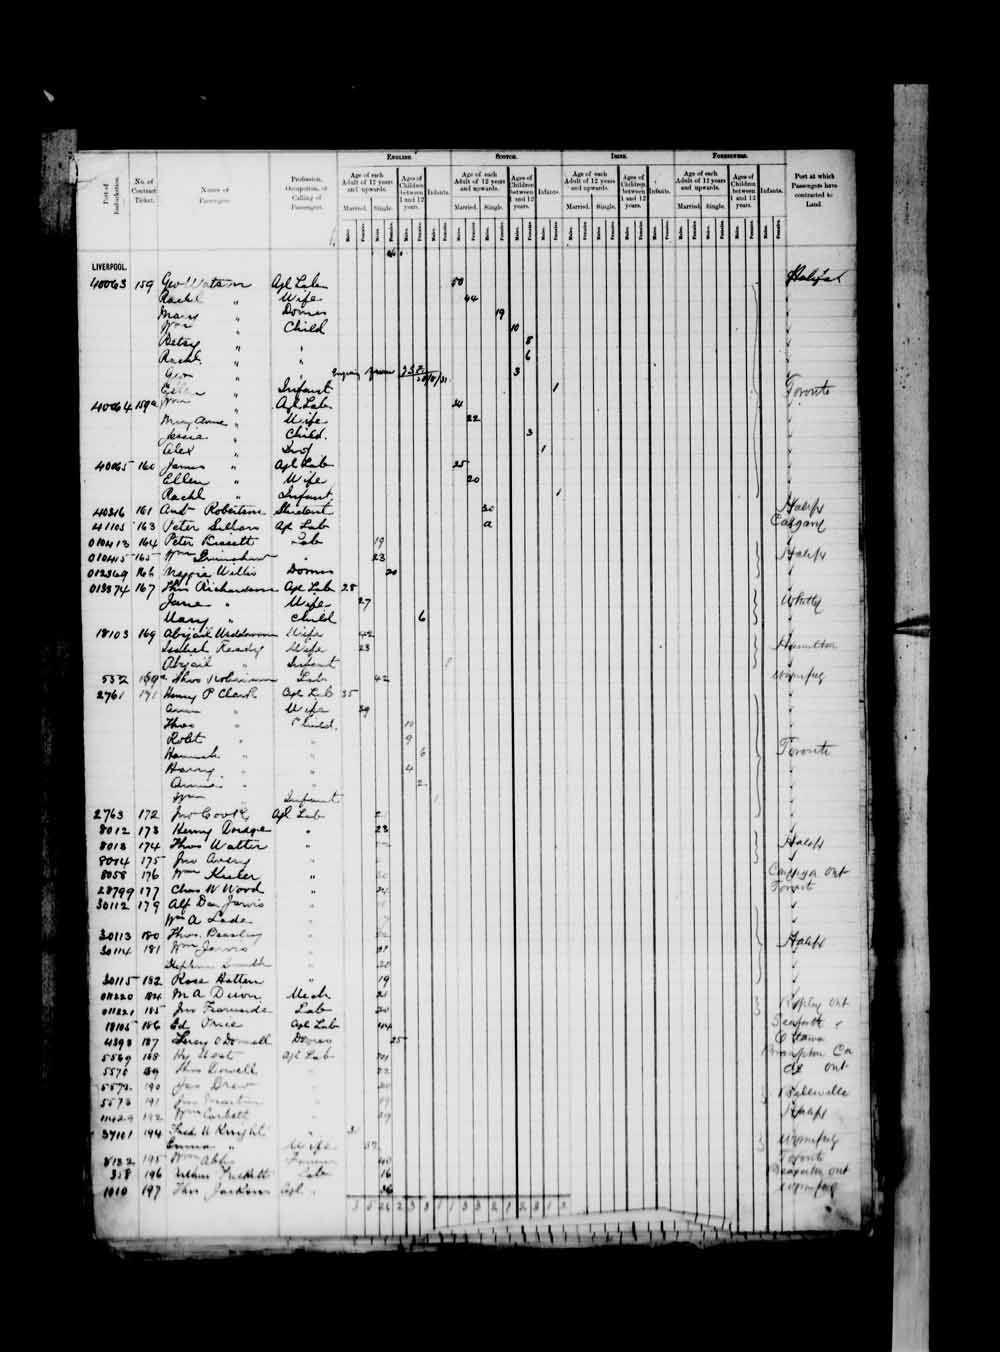 Digitized page of Passenger Lists for Image No.: e003674943